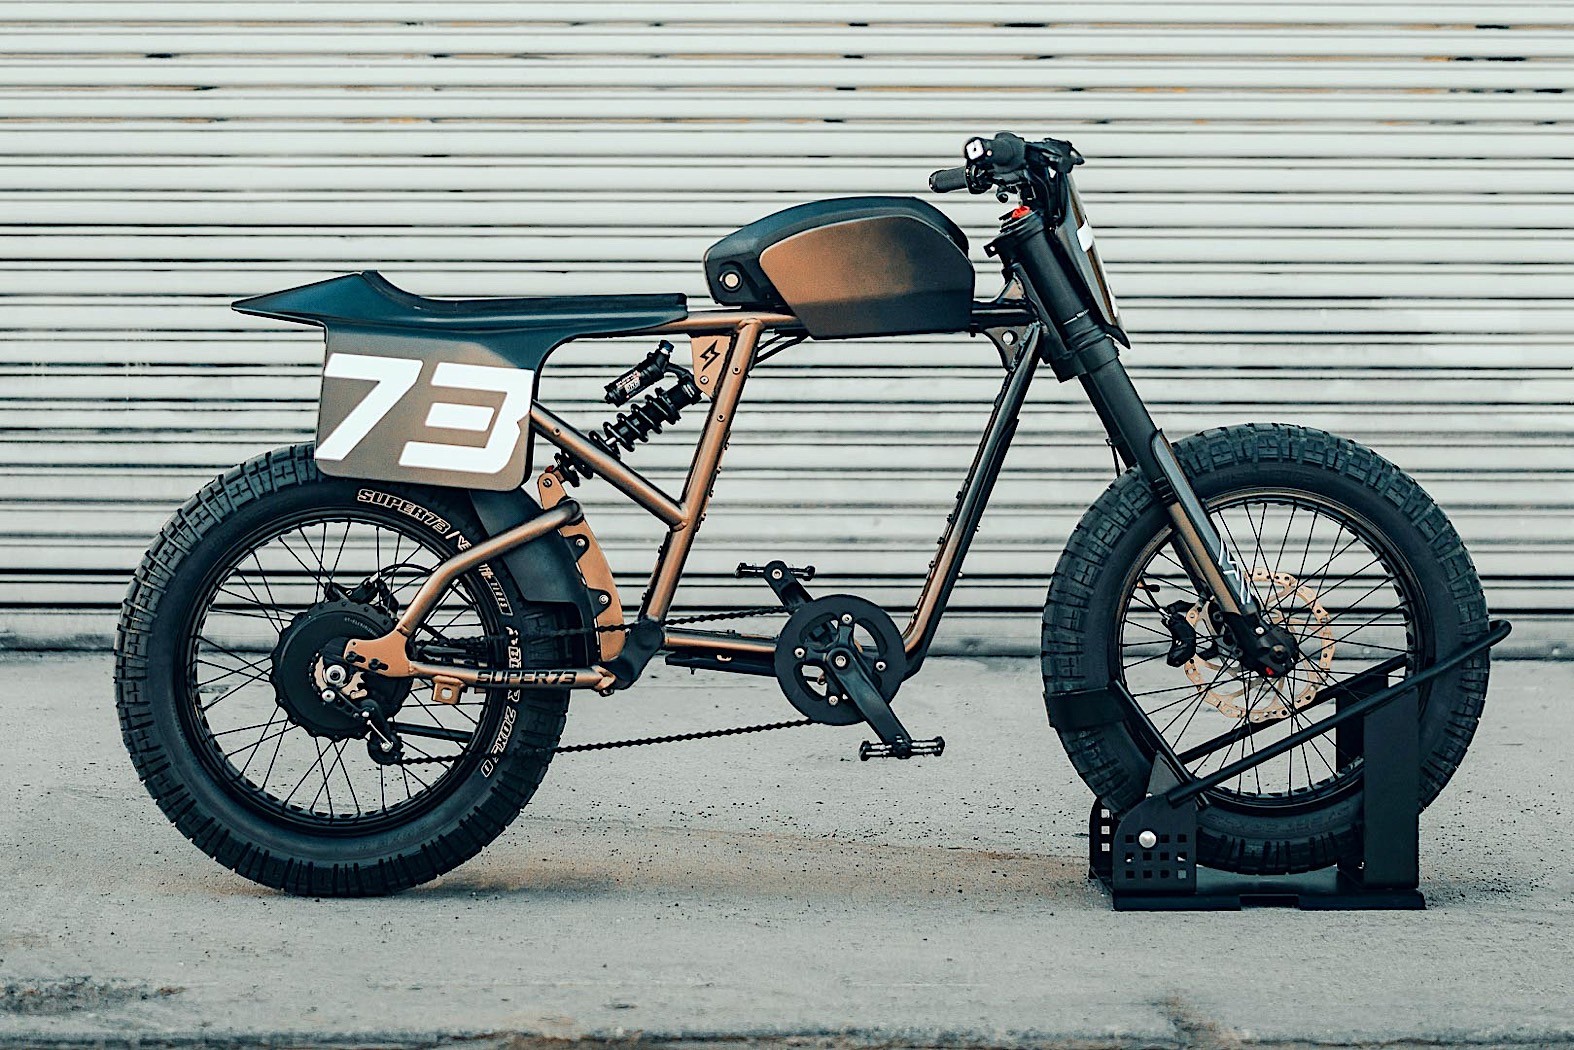 Super73 Flat Track RX Electric Bike Is All About Racing - autoevolution